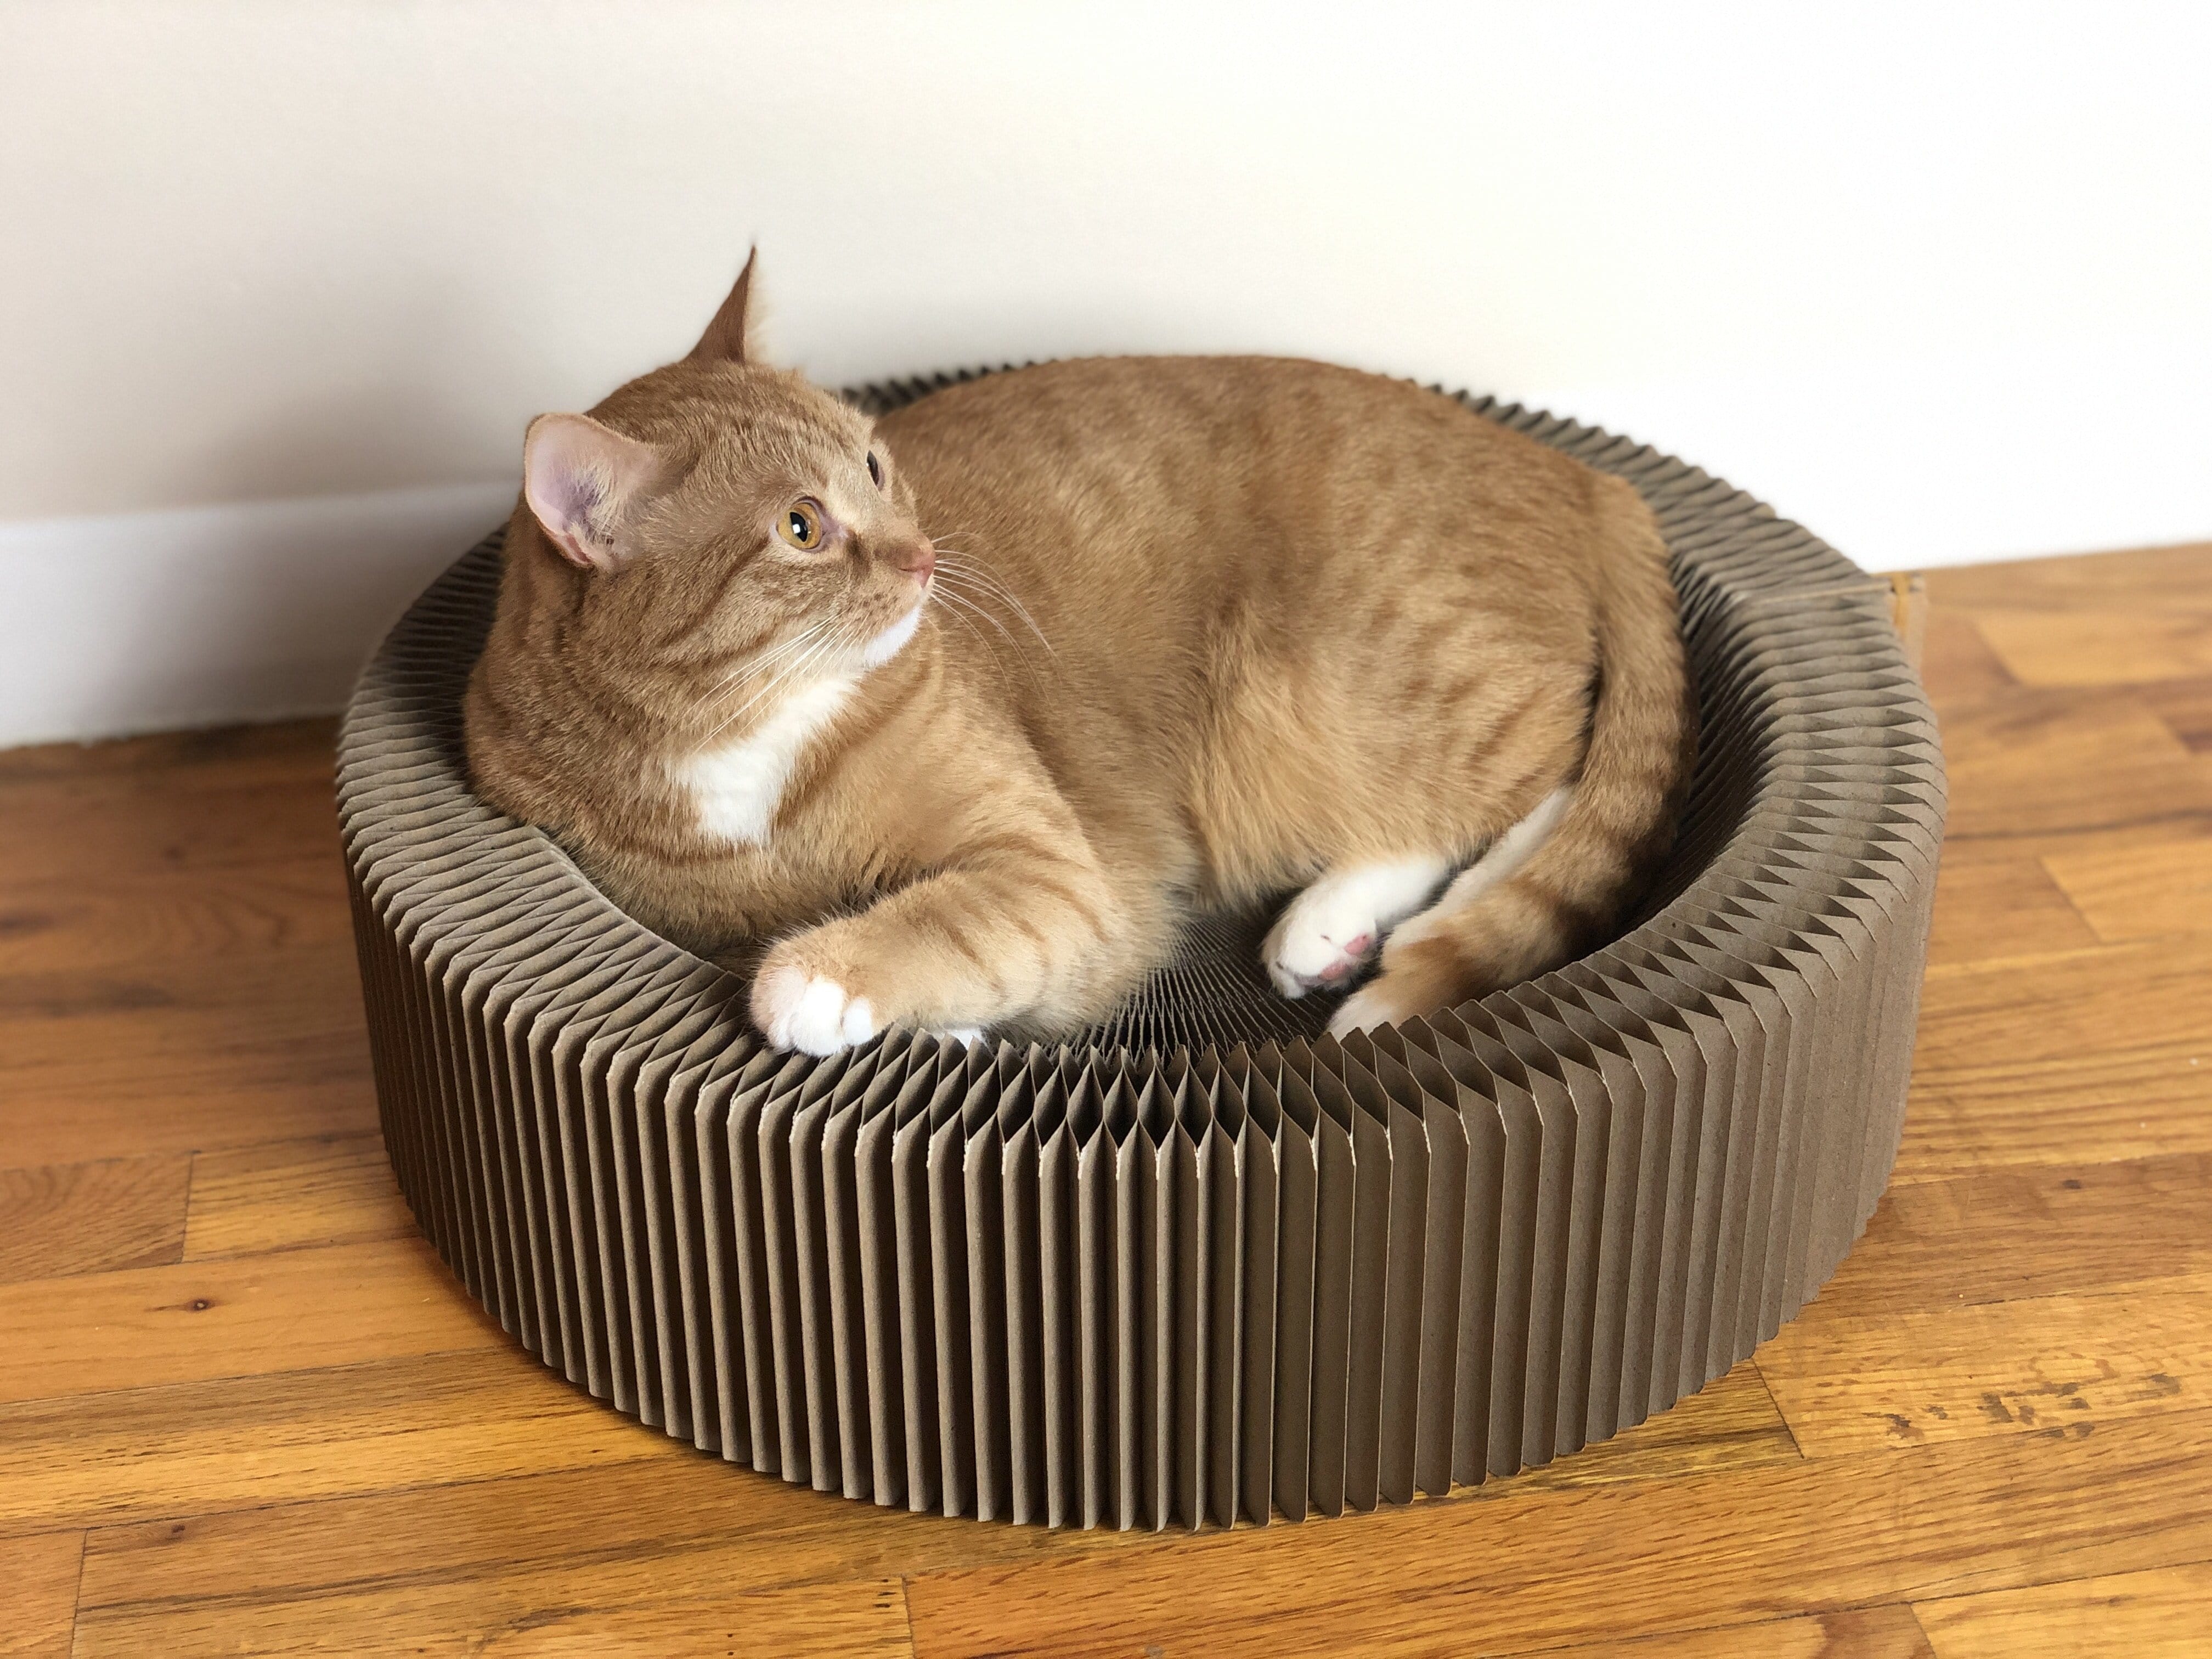 "The Accordion" Travel Cardboard Bed & Scratcher